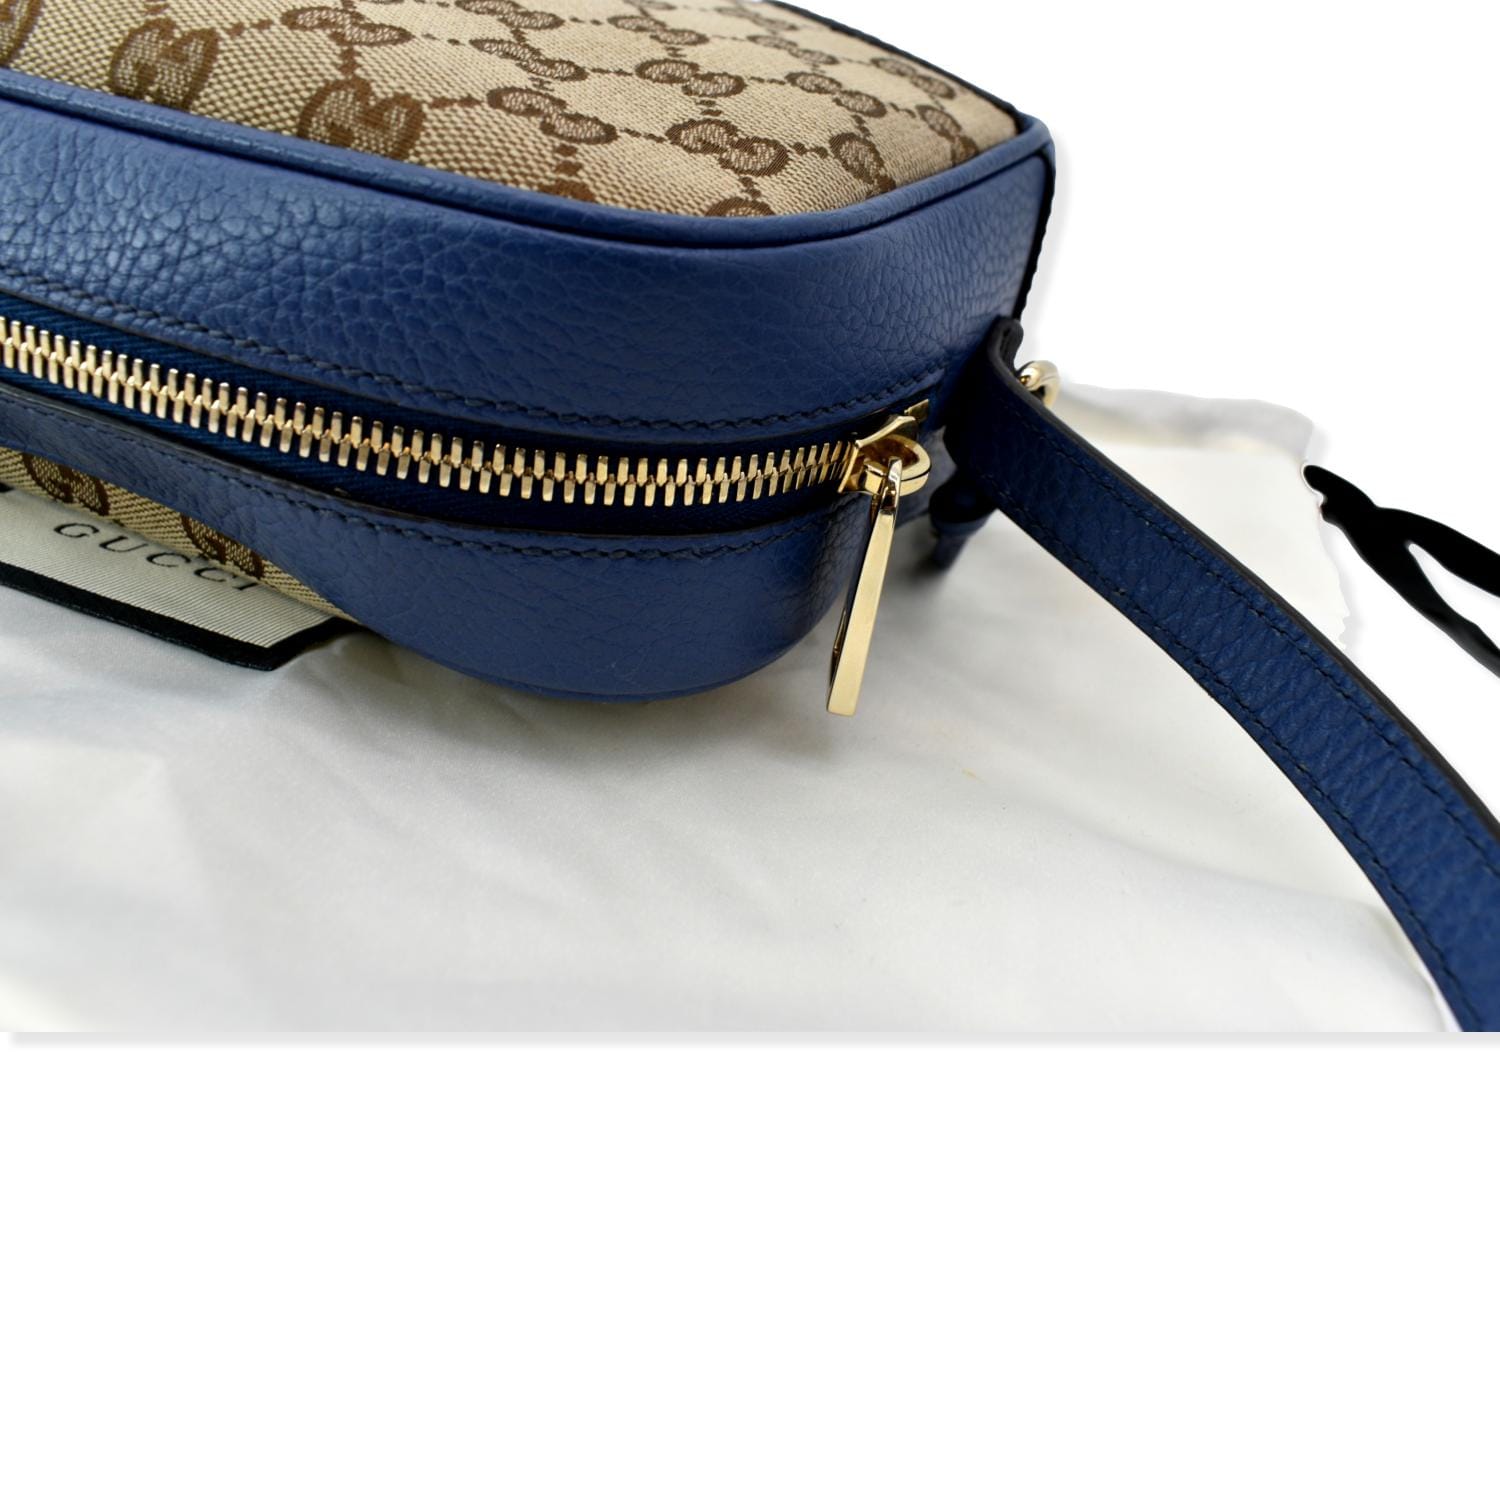 Gucci Soho Bree Crossbody Bag Blue in Leather with Gold-tone - US